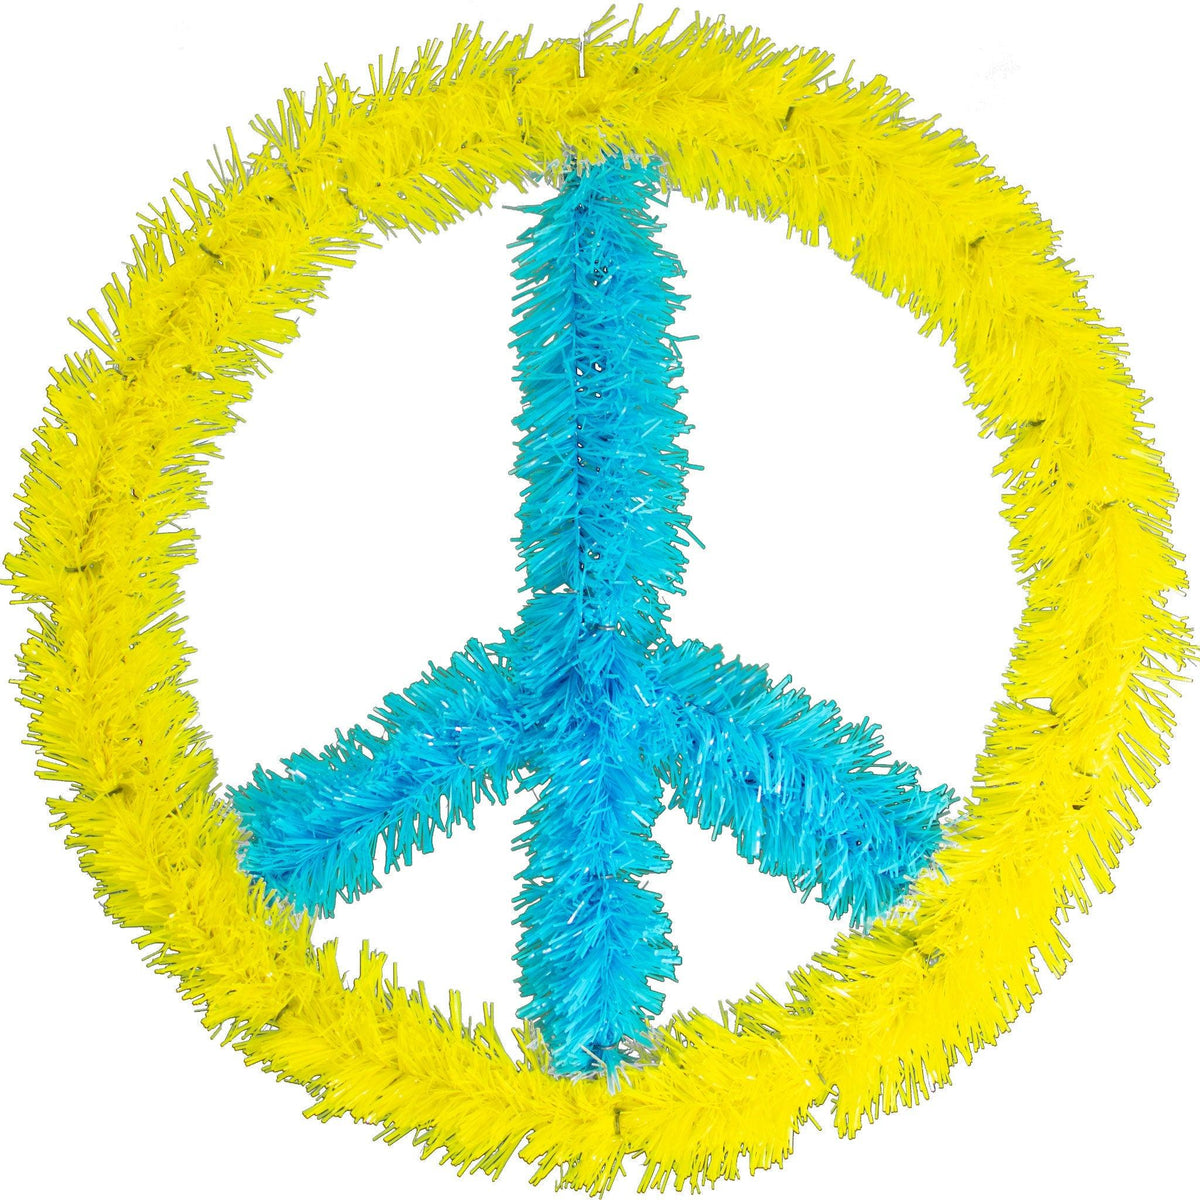 Lee Display stands with the people of Ukraine. Support Ukraine with a Blue and Gold Peace Sign. Protest the invasion of Ukraine. Show your support with us and we'll donate the proceeds to Ukraine and the Nova Ukraine association. Shop now at leedisplay.com